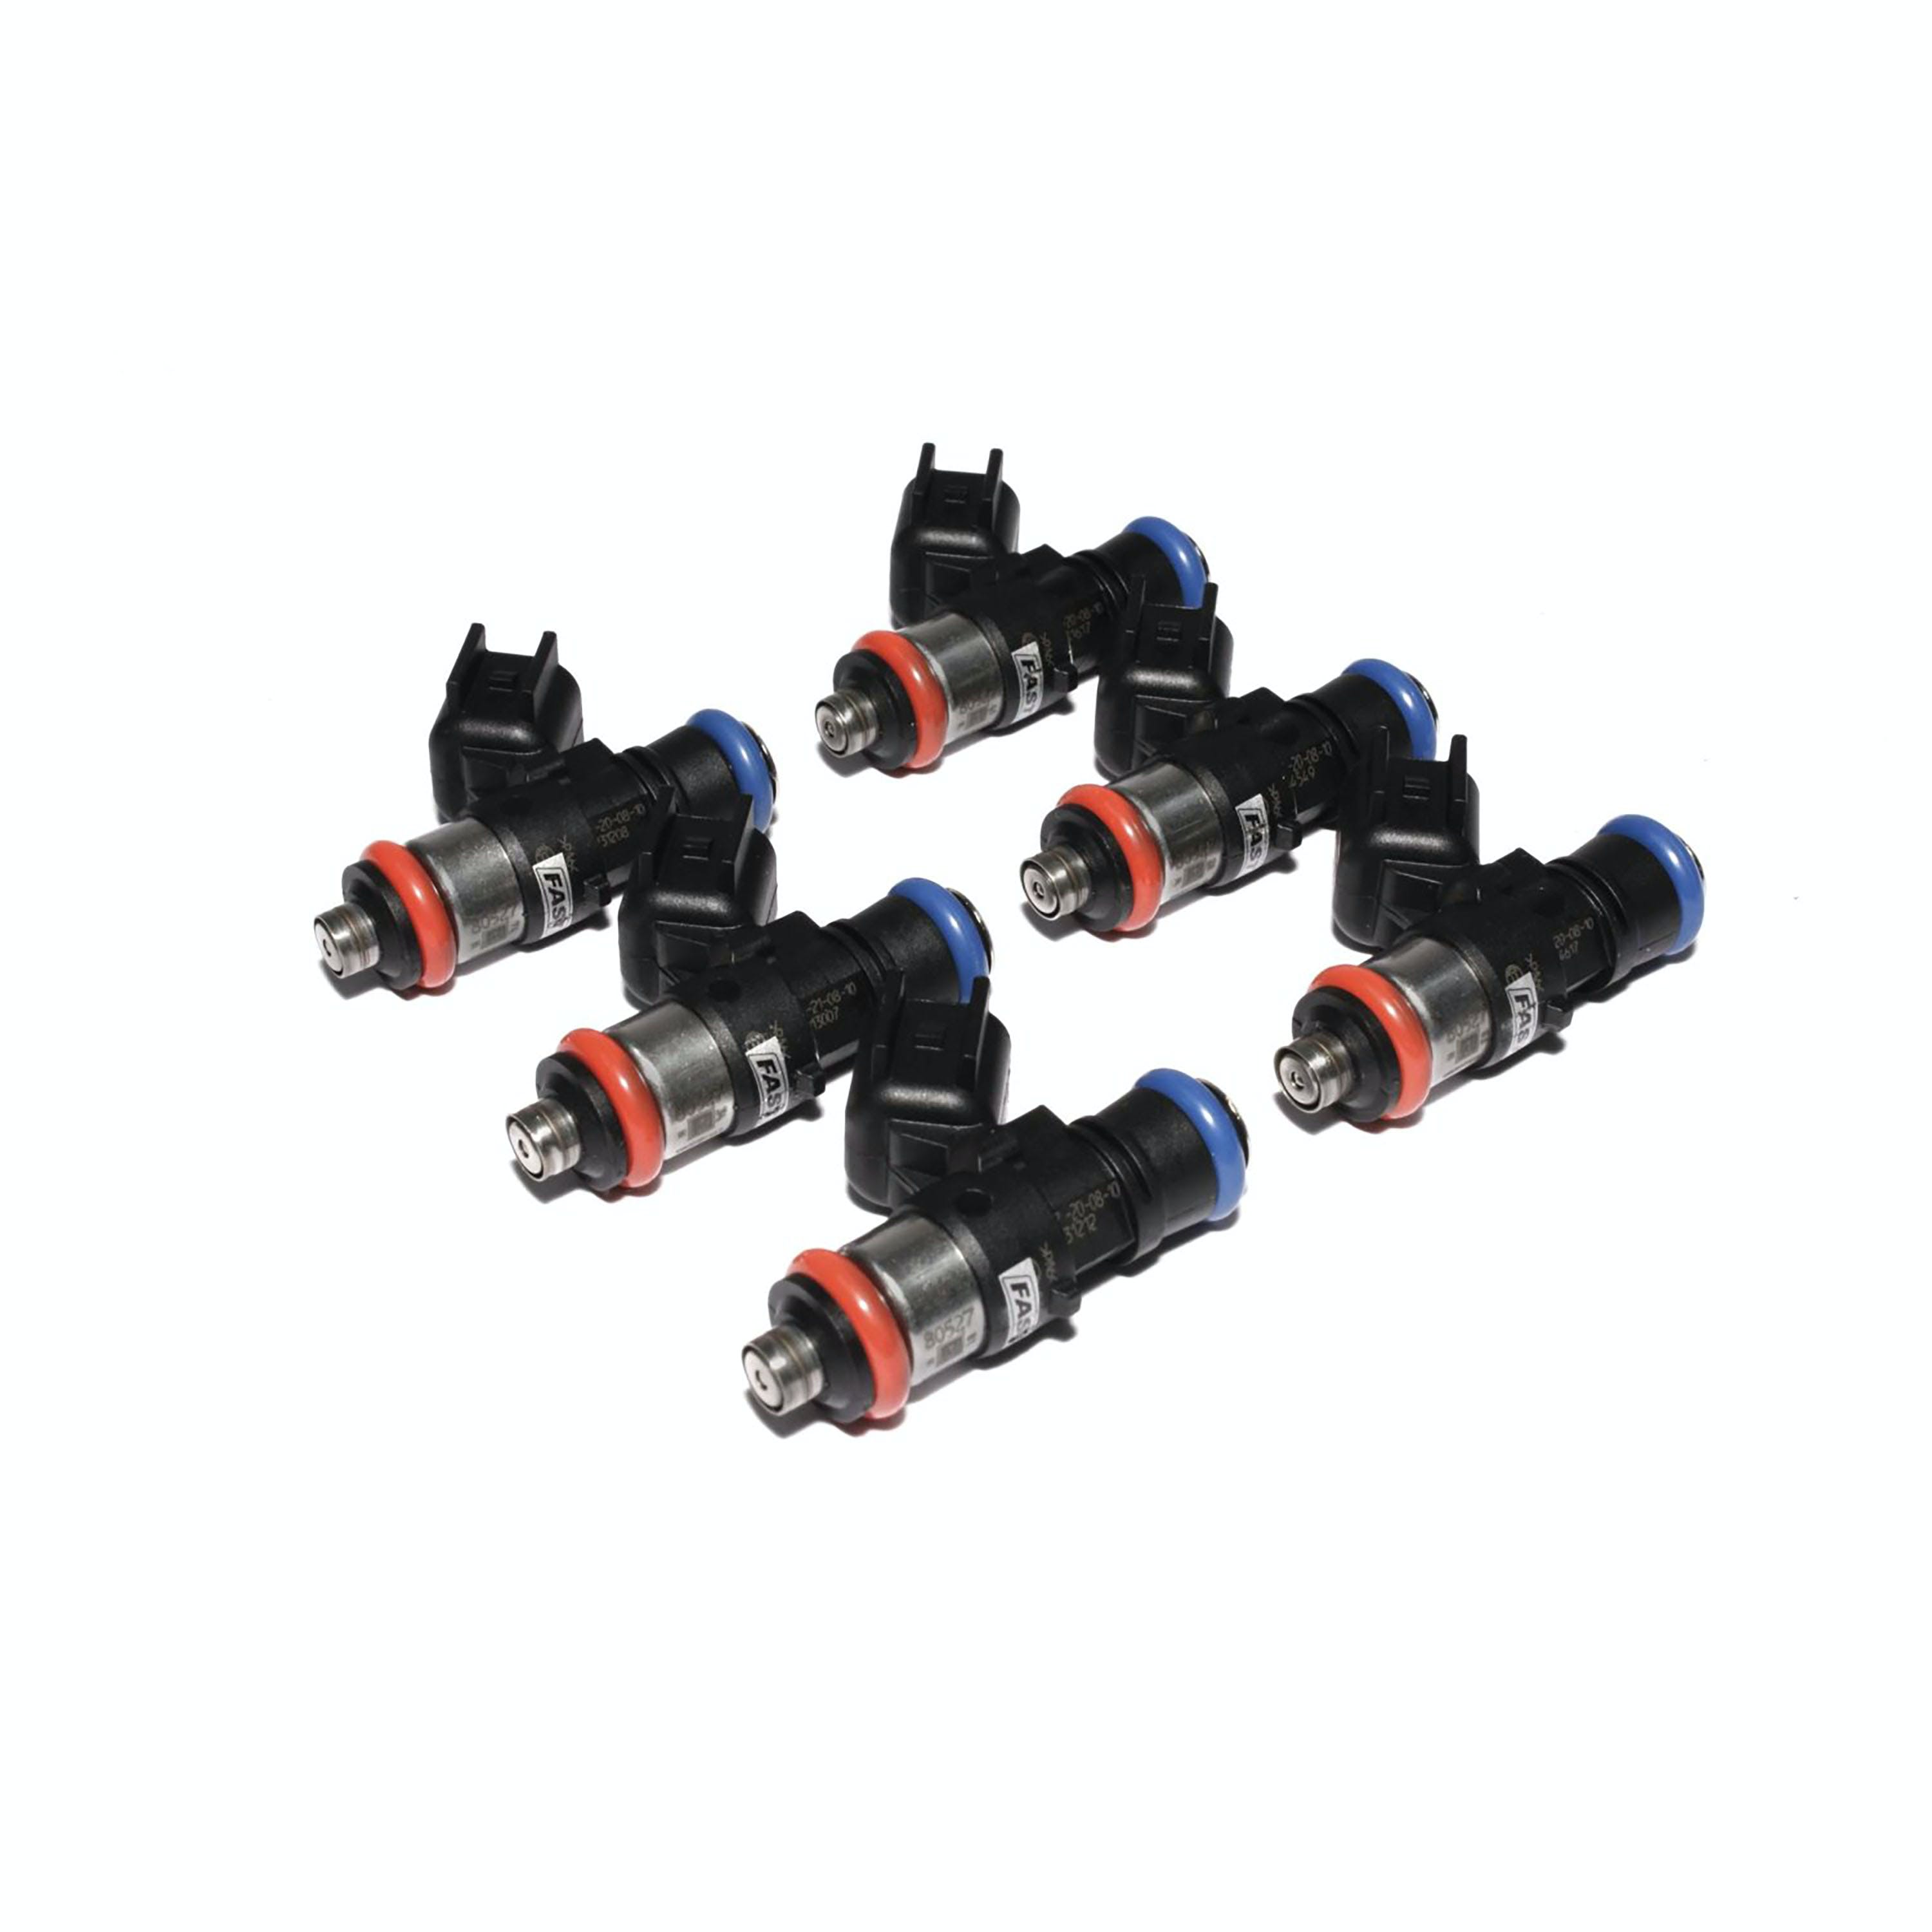 FAST - Fuel Air Spark Technology 30859-6 Injector, Fast 6-Pack 85 Lb/Hr 598.5Cc/M